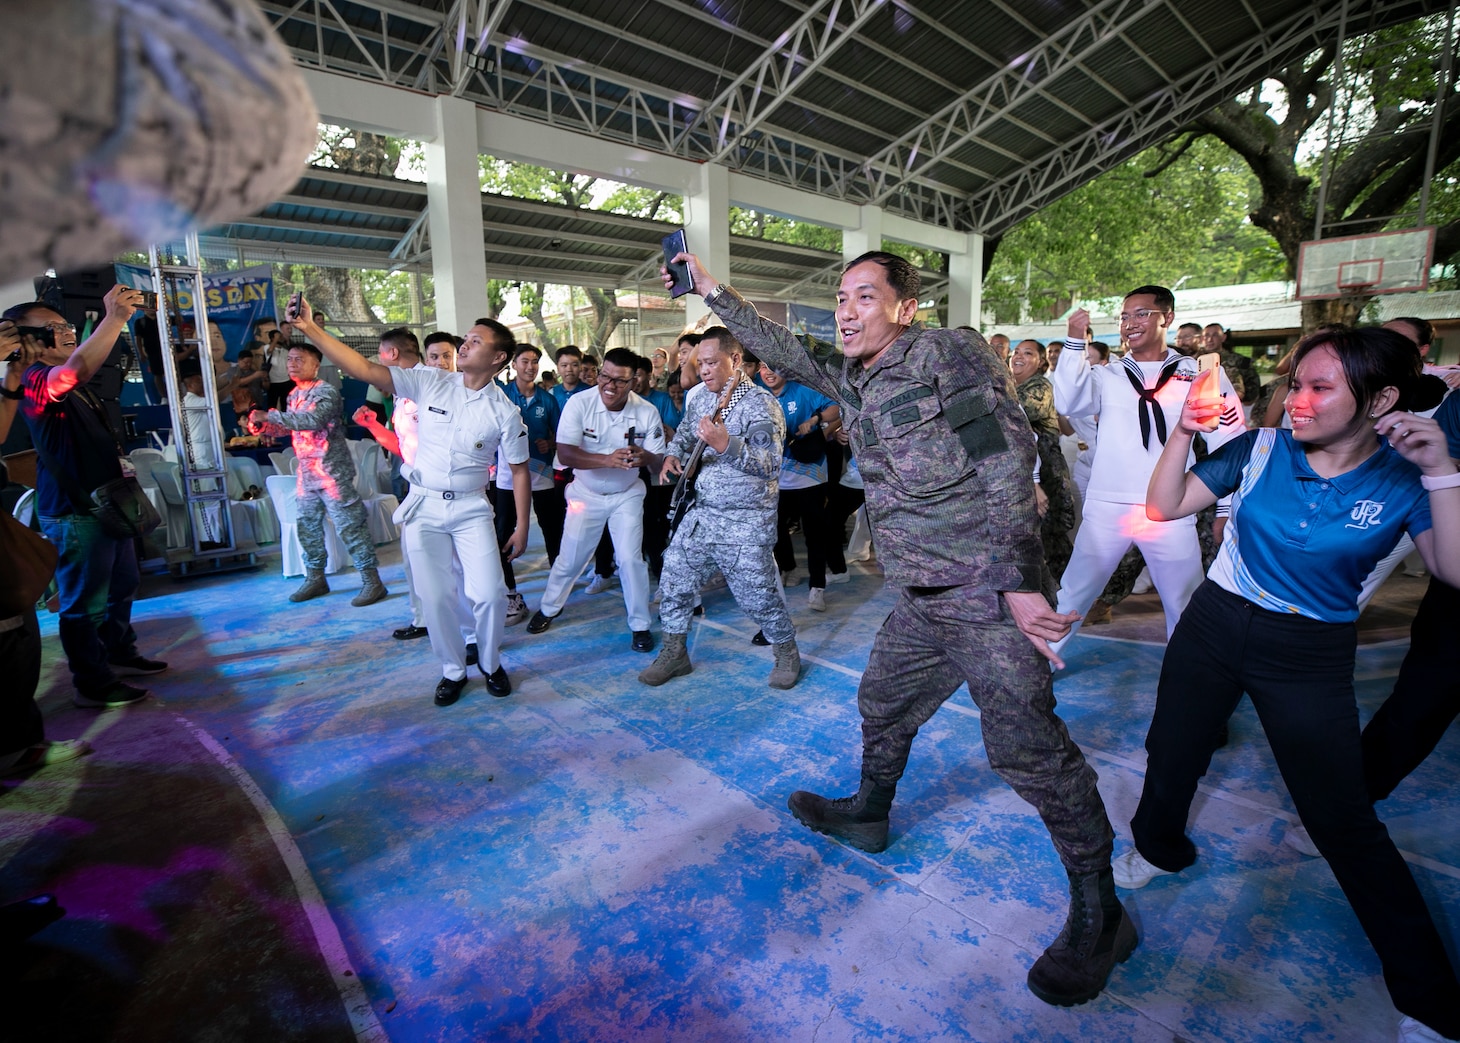 LA UNION, Philippines (Aug. 30. 2023) – Service members with the Armed Forces of the Philippines, U.S. Navy, Republic of Korea Cheon Ja Bong (LST-687), Australian Defense Forces students and civilians dance during a concert held at the end of the Pacific Partnership 2023 closing ceremony held at La Union National High School in San Fernando City, La Union, Philippines, Aug. 30.  Now in its 18th year, Pacific Partnership is the largest annual multinational humanitarian assistance and disaster relief preparedness mission conducted in the Indo-Pacific. (U.S. Navy photo by Mass Communication Specialist 1st Class Kegan E. Kay)